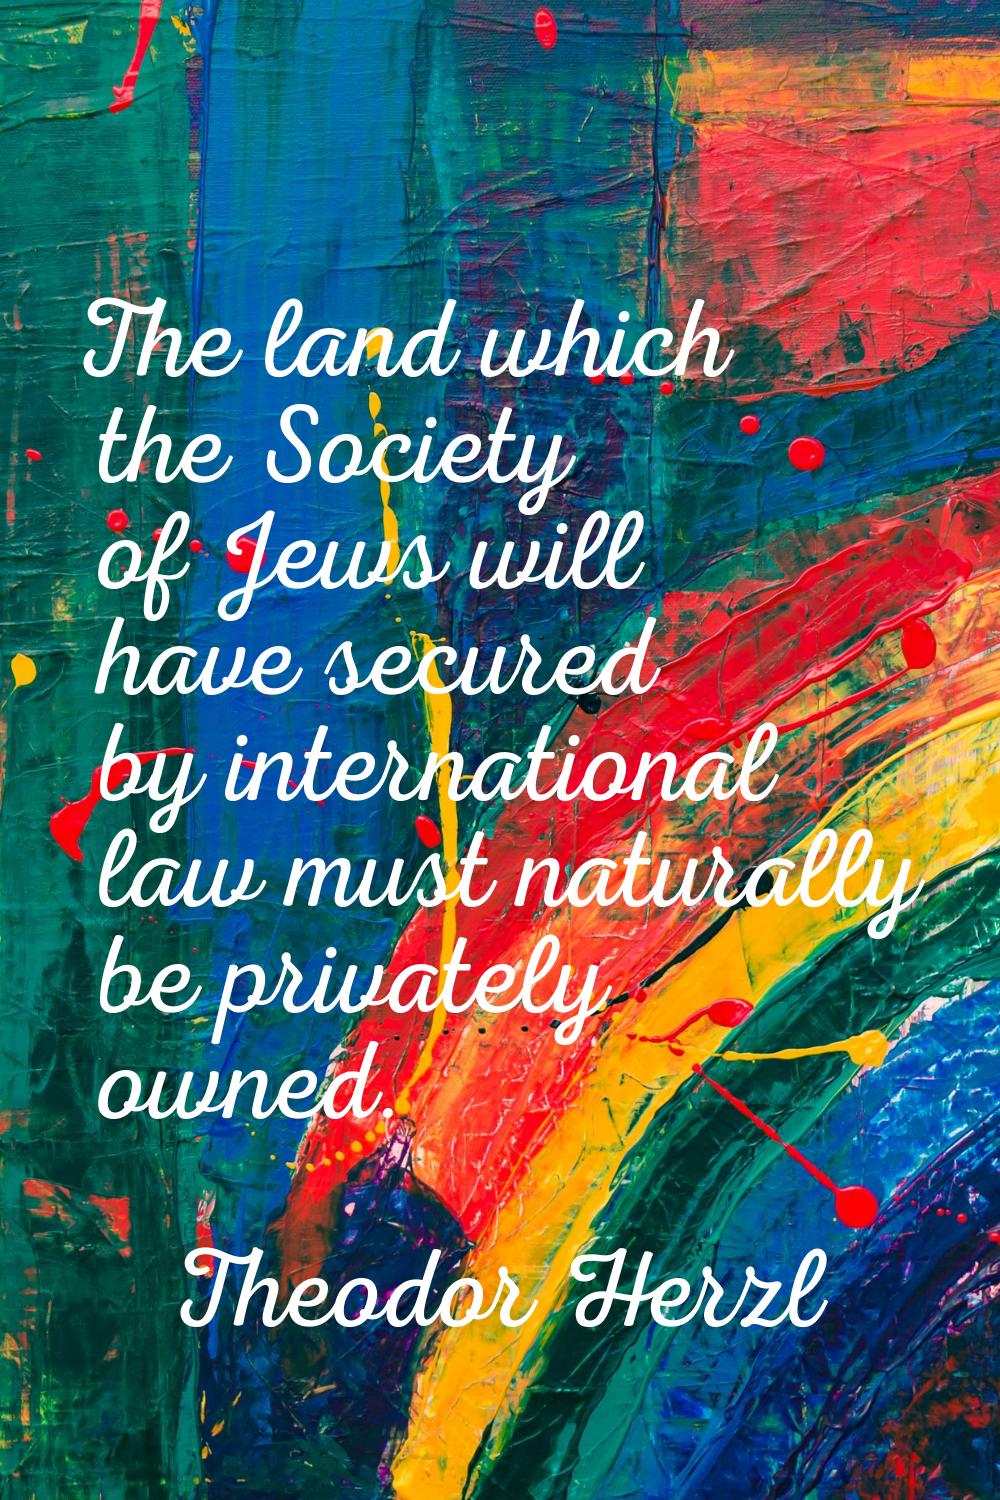 The land which the Society of Jews will have secured by international law must naturally be private